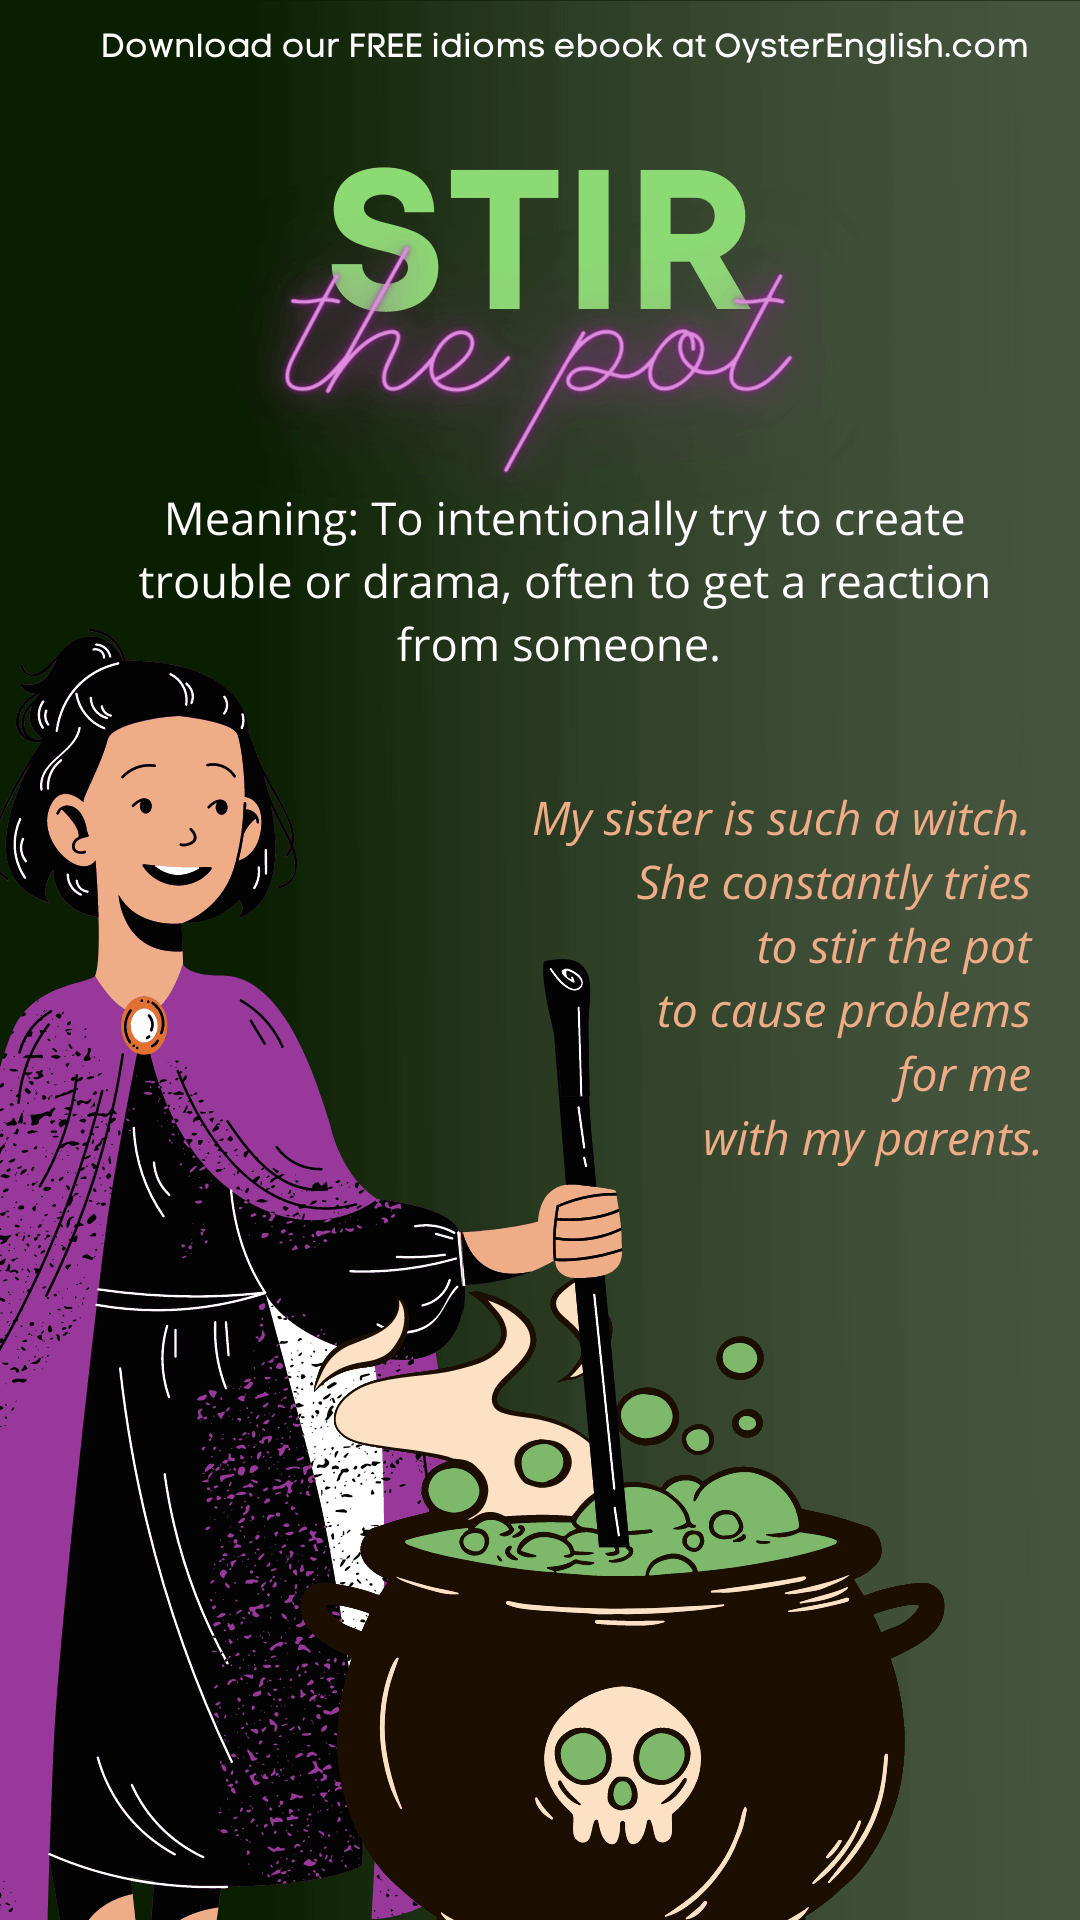 https://www.oysterenglish.com/images/idiom-stir-the-pot.png